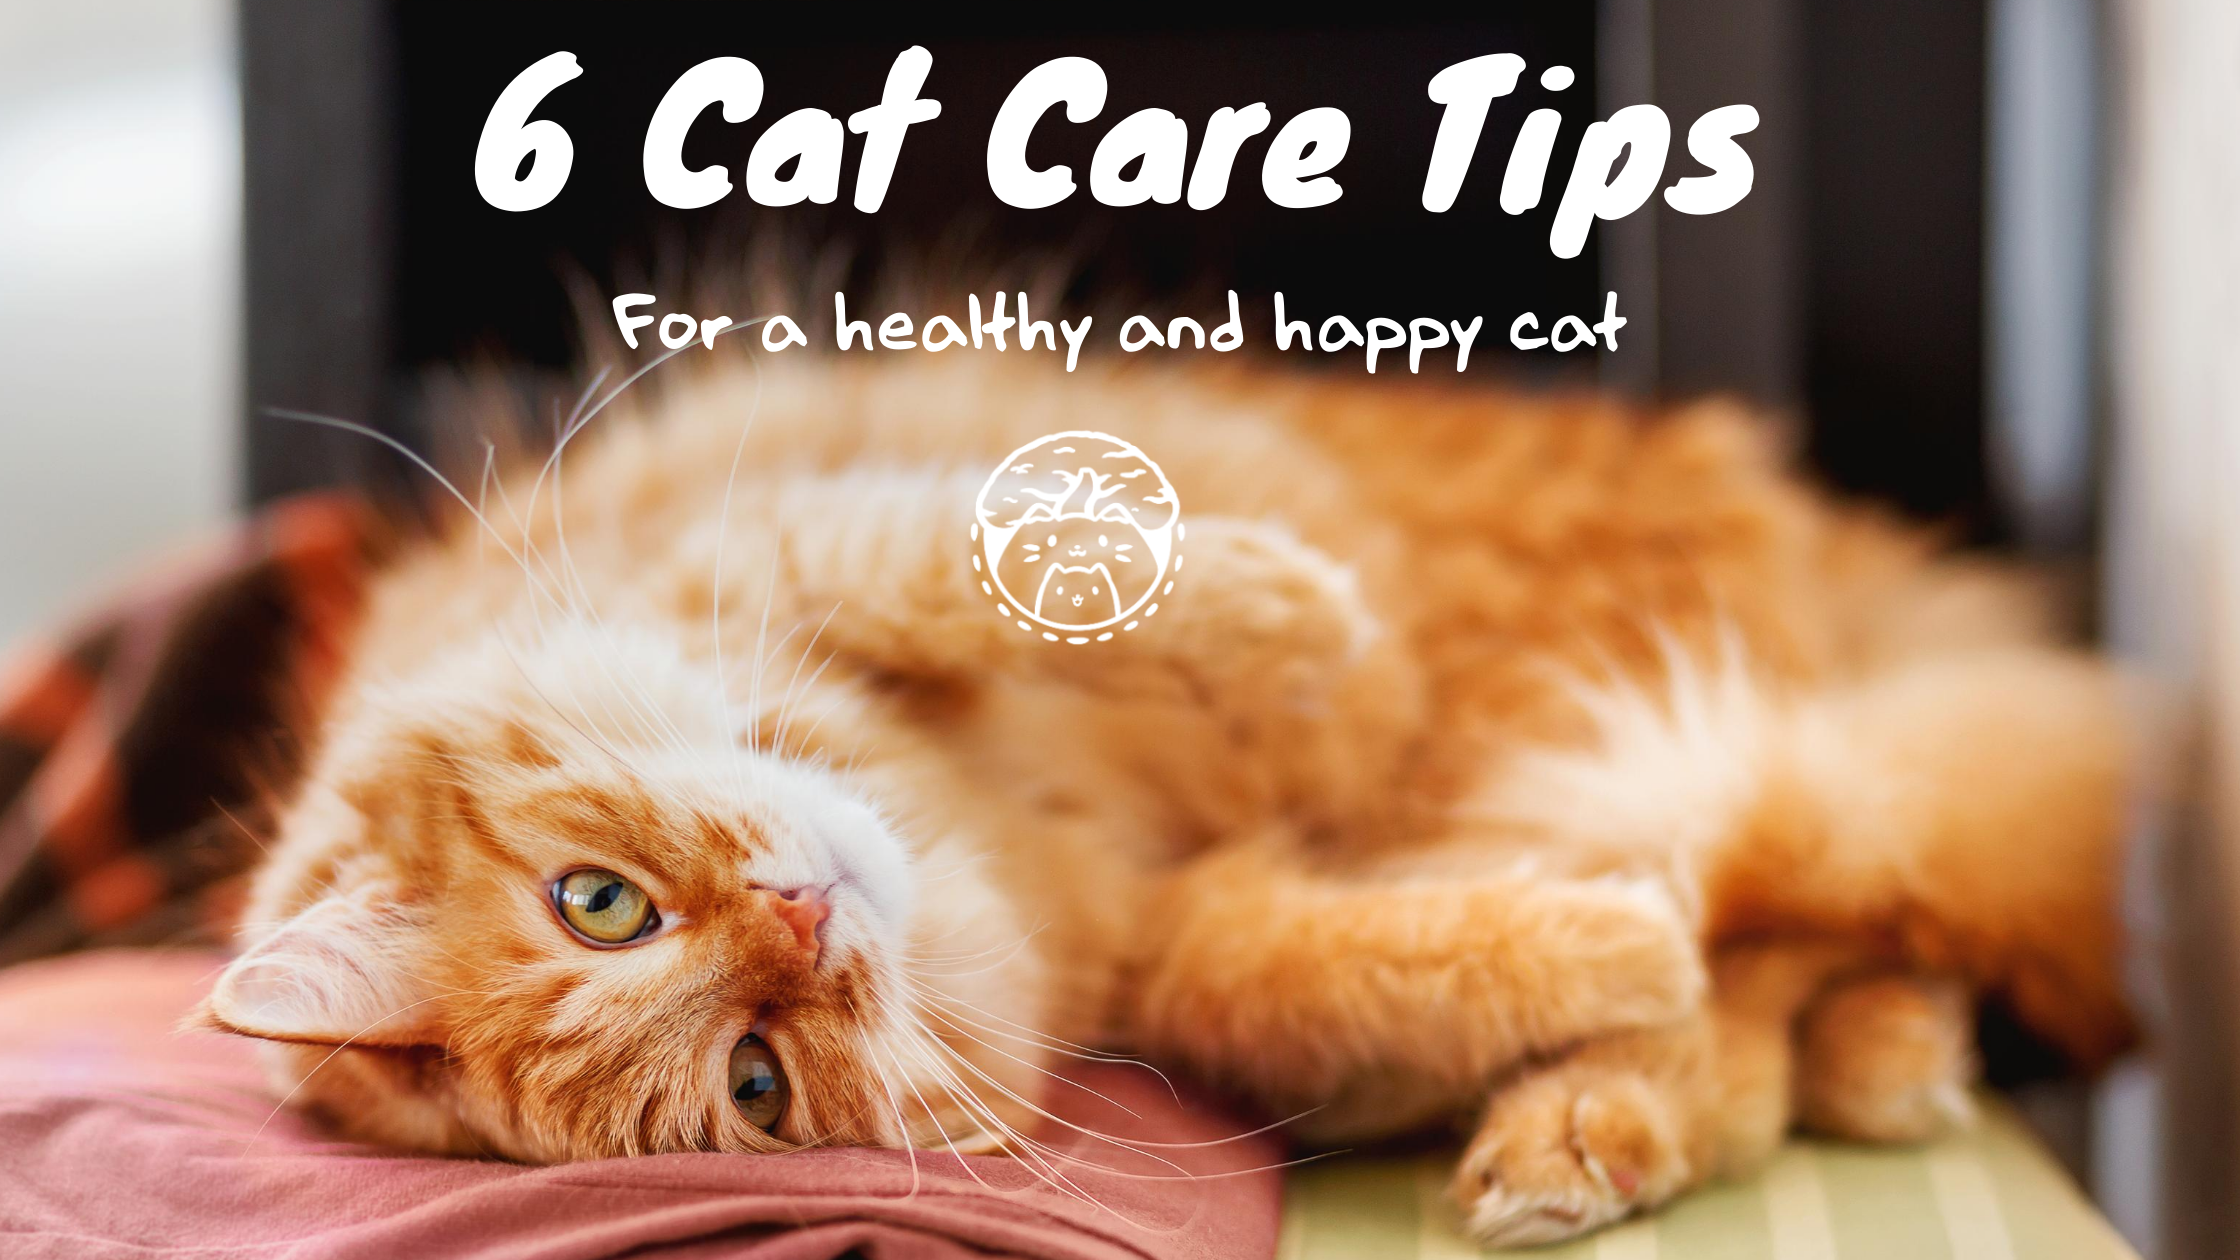 6 cat care tips title image